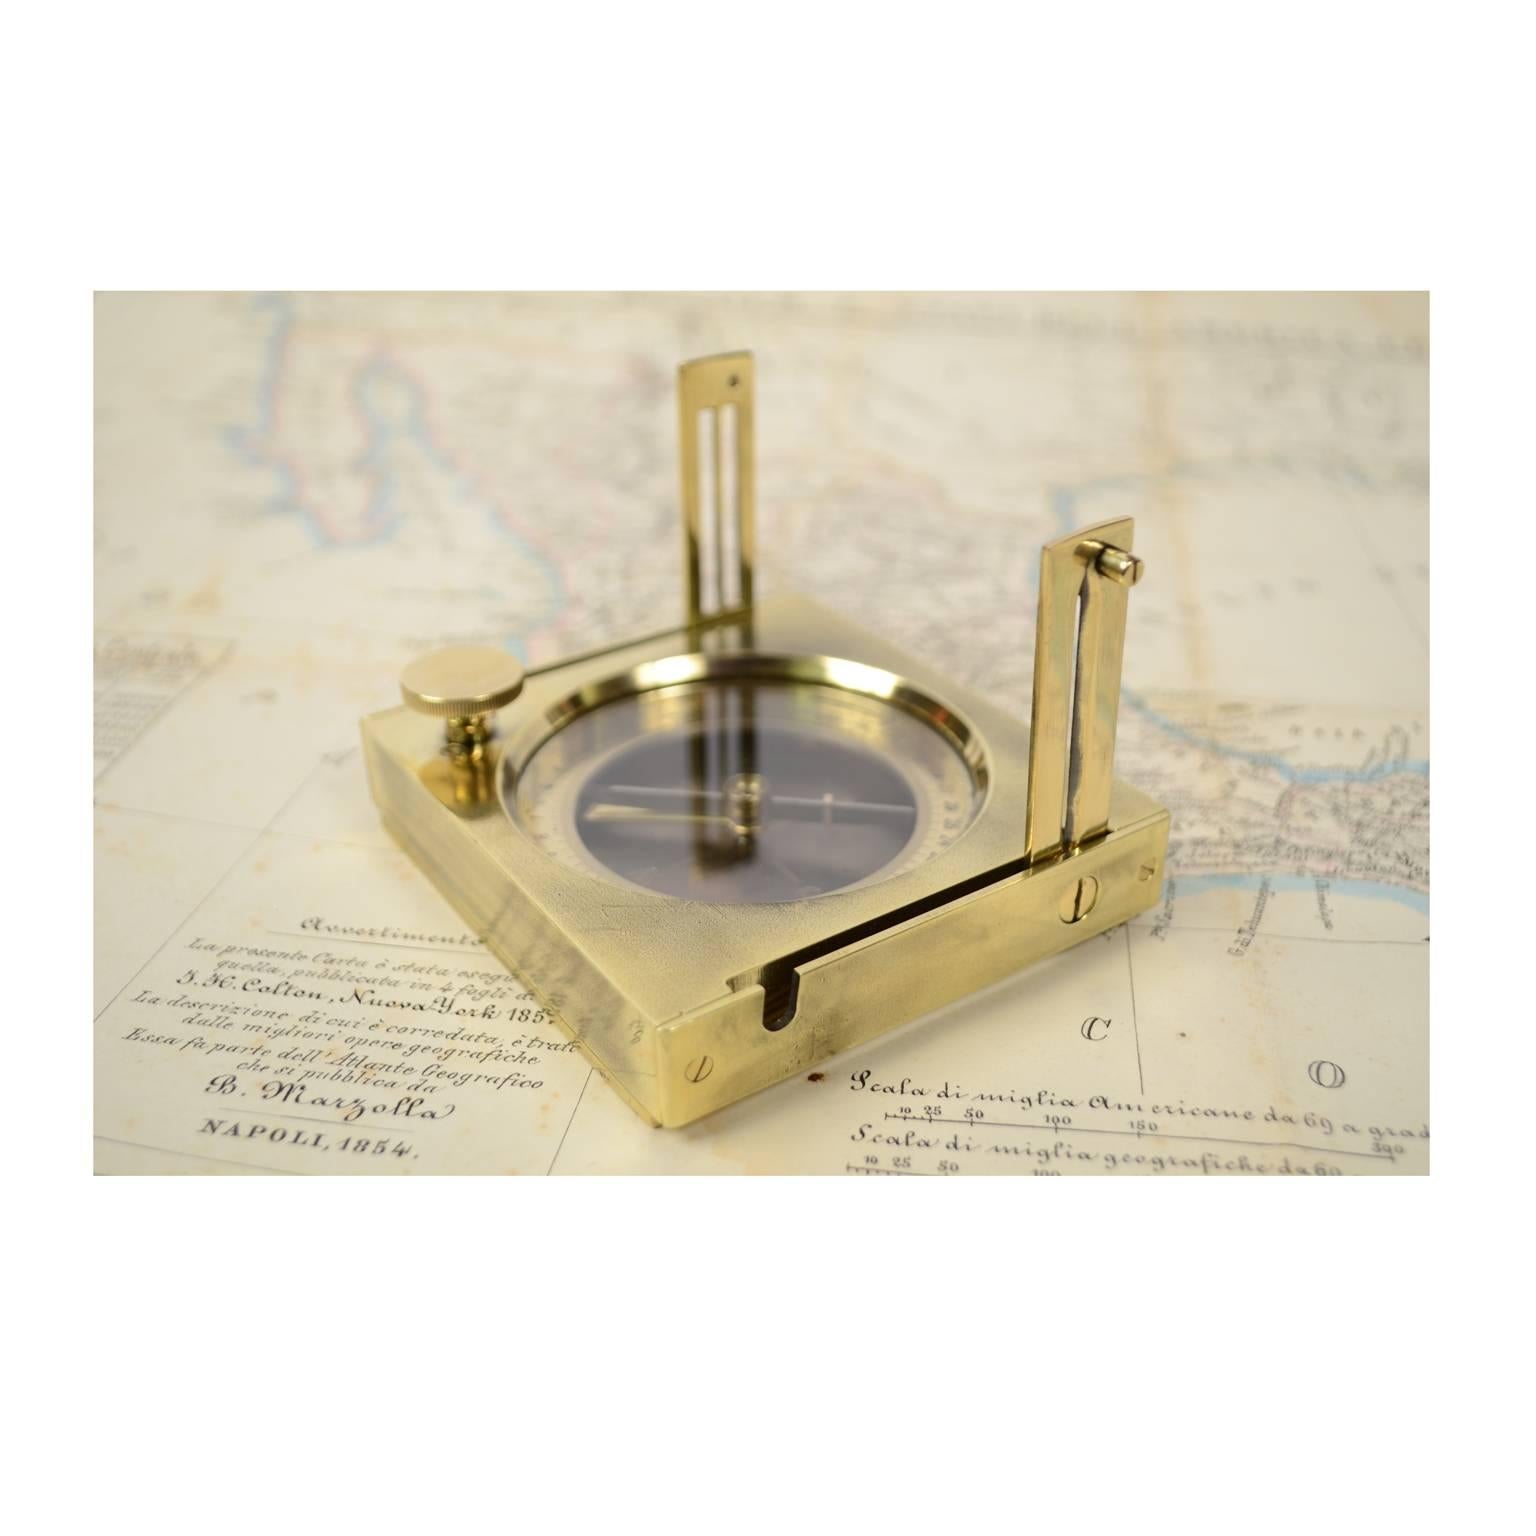 Early 20th Century Brass Topographic Compass Placed in Its Original Walnut Box